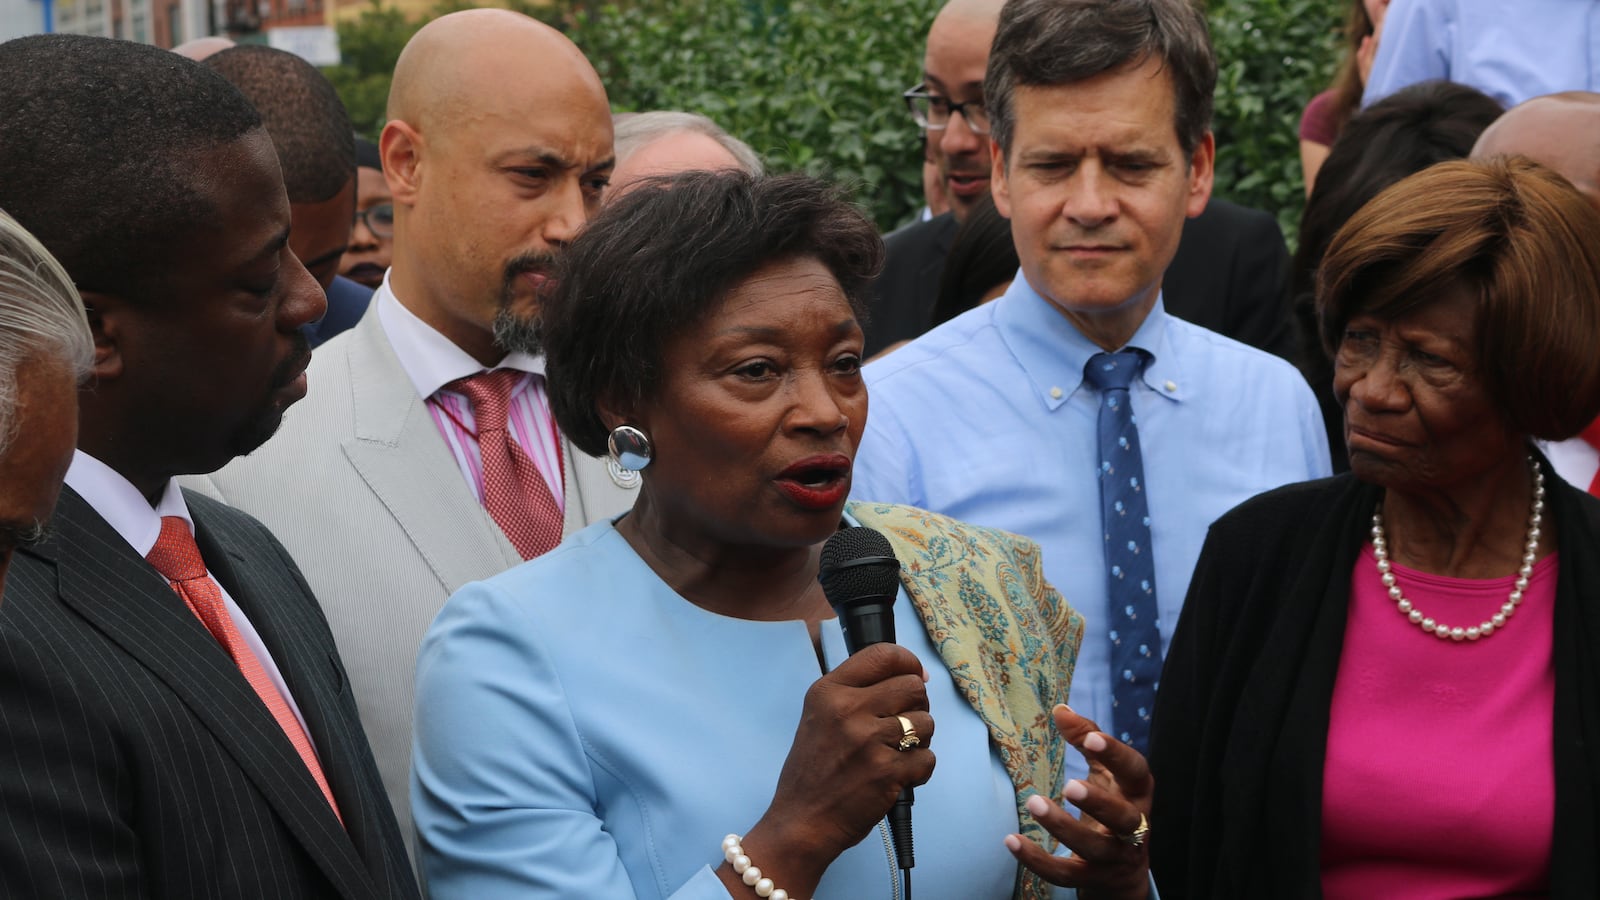 Senator Andrea Stewart-Cousins appeared at a rally in Harlem on Monday.